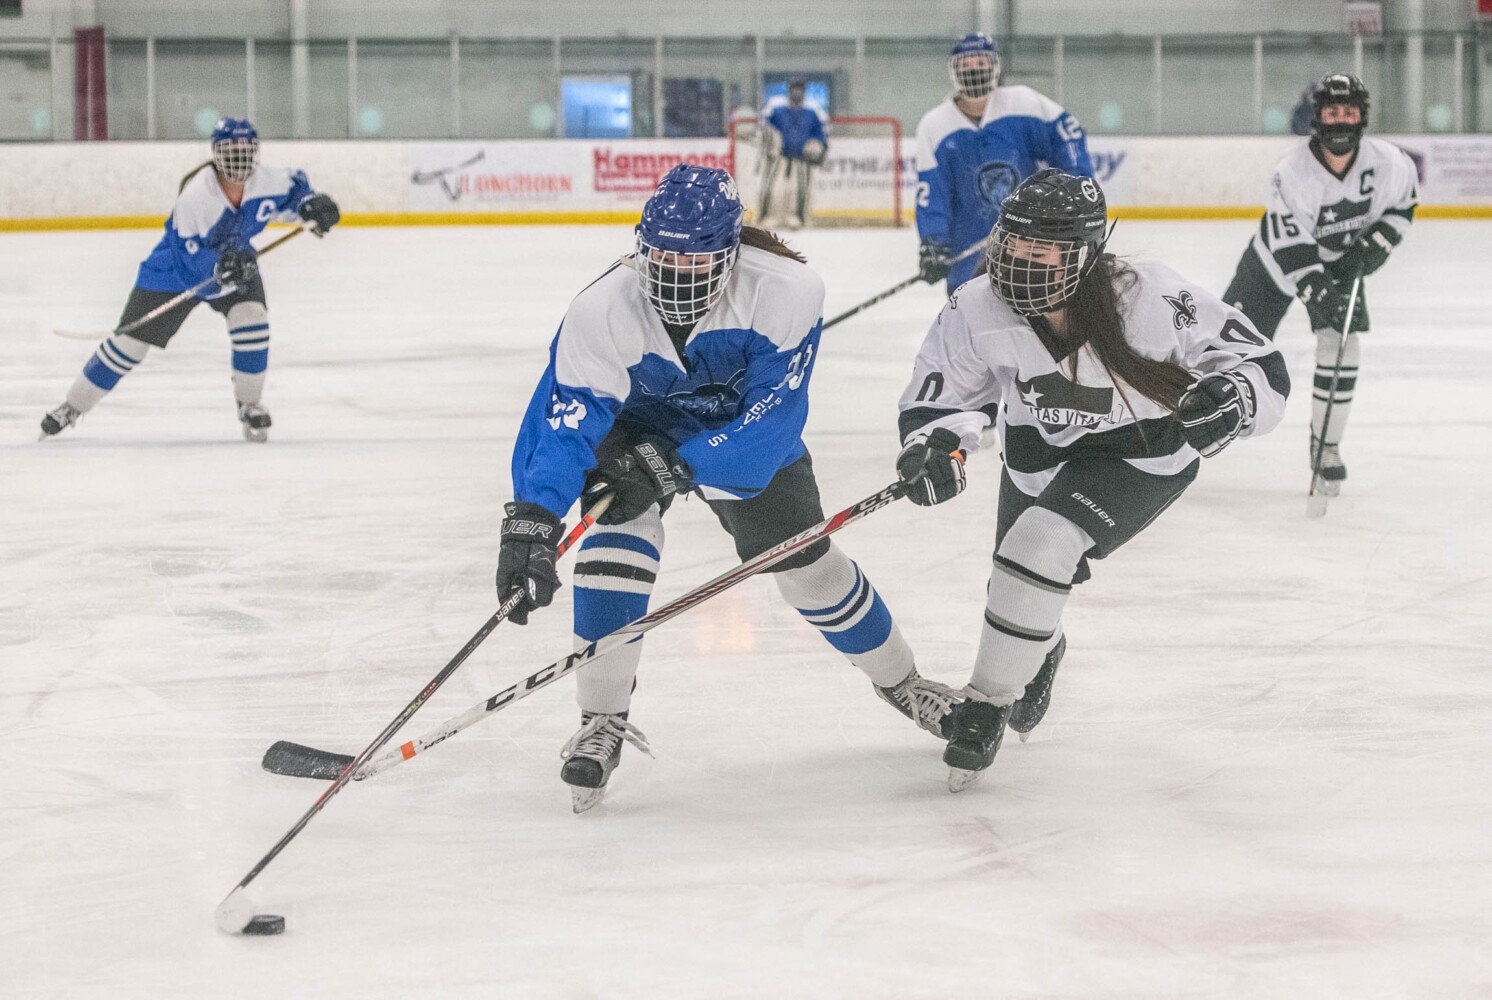 Girls Ice Hockey: 2021 Lady Blue Devils Are a Young, Deep Team